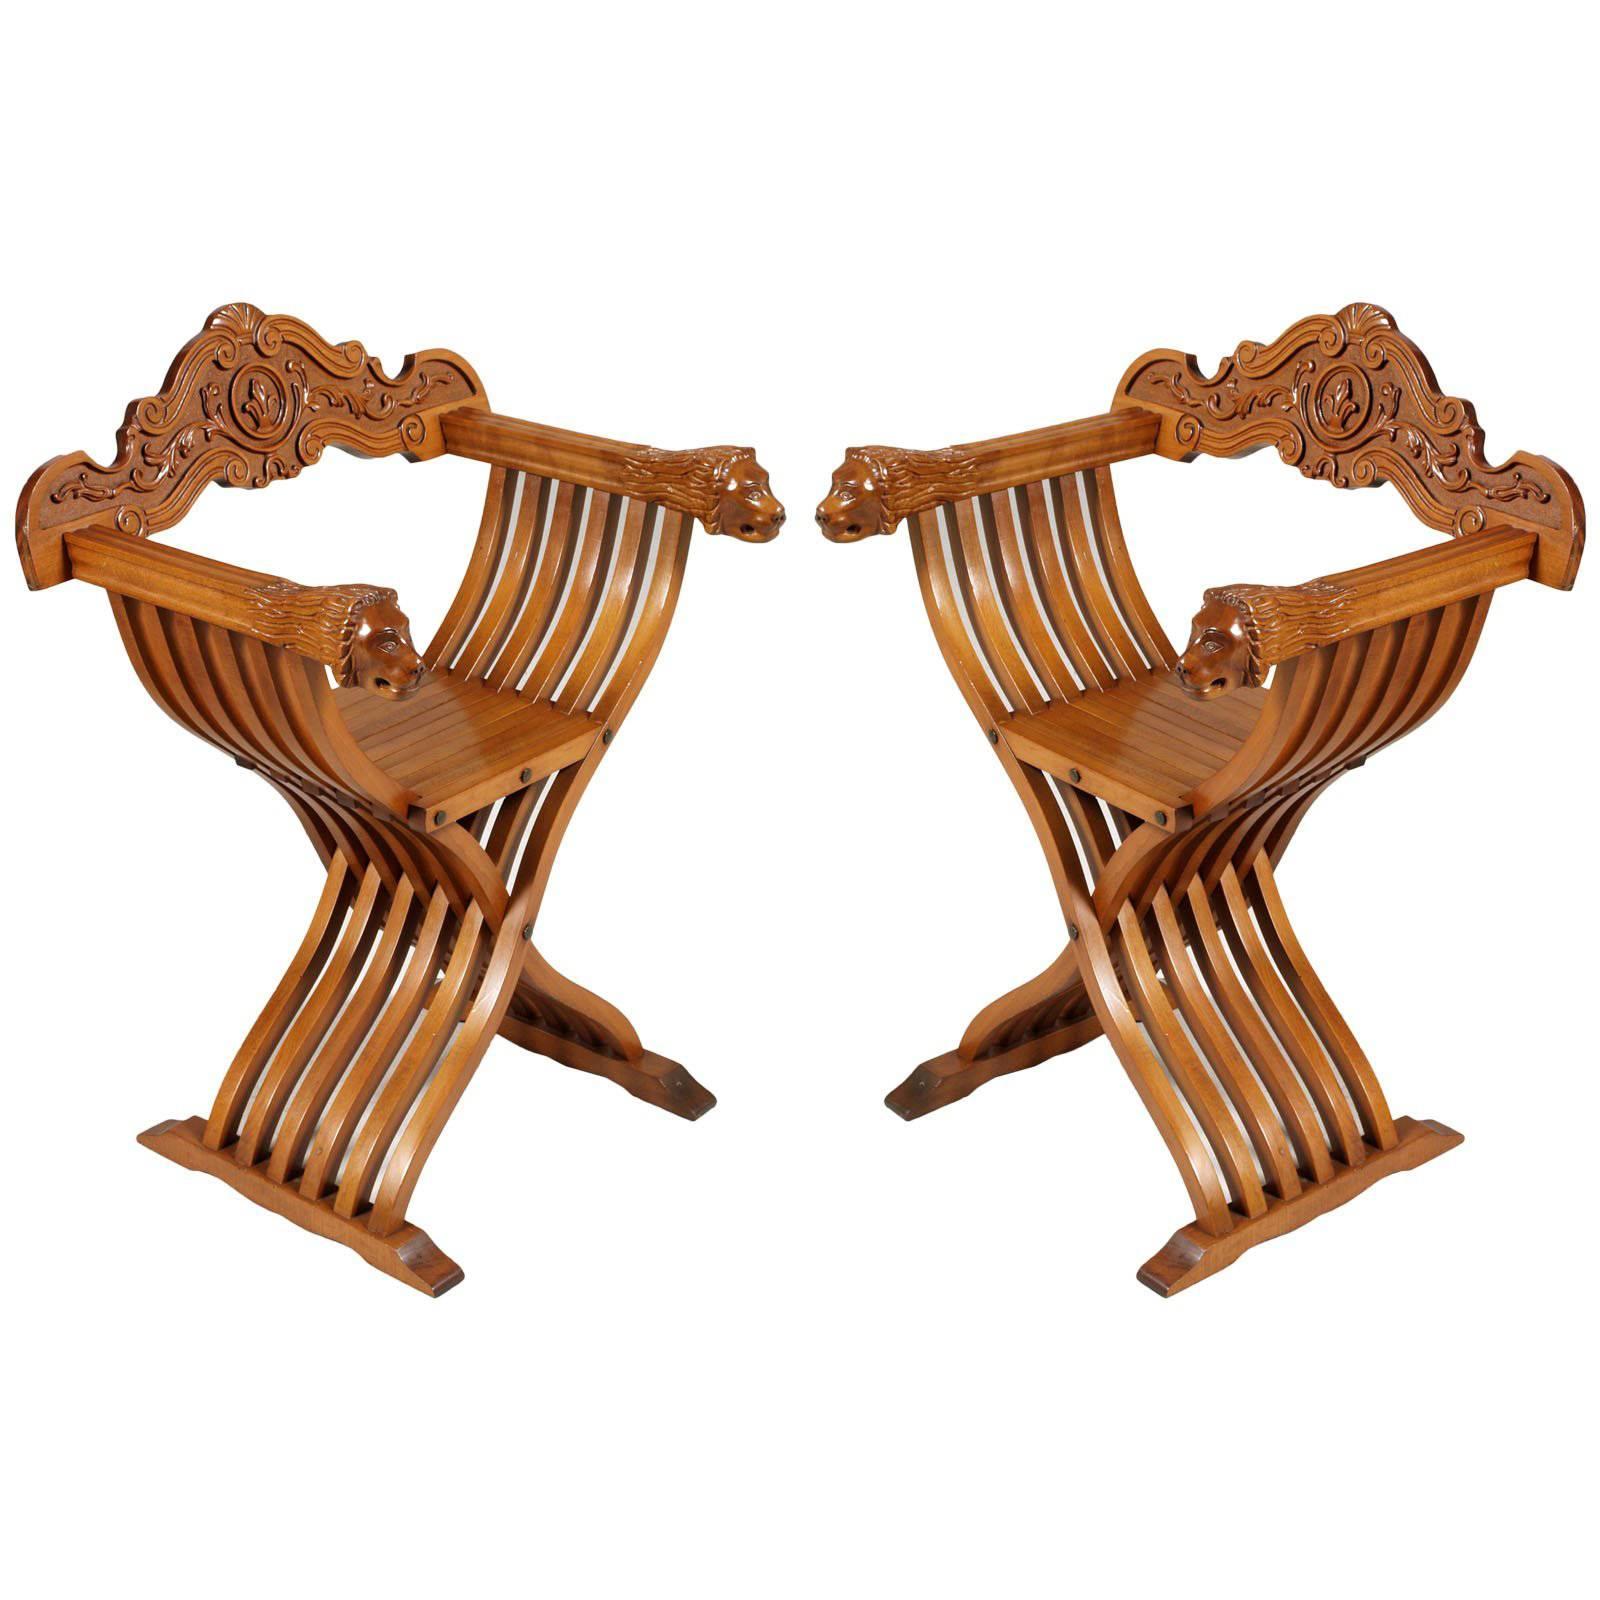 Early 20th Century Renaissance Savonarola Pair of Chairs in Carved Blond Walnut